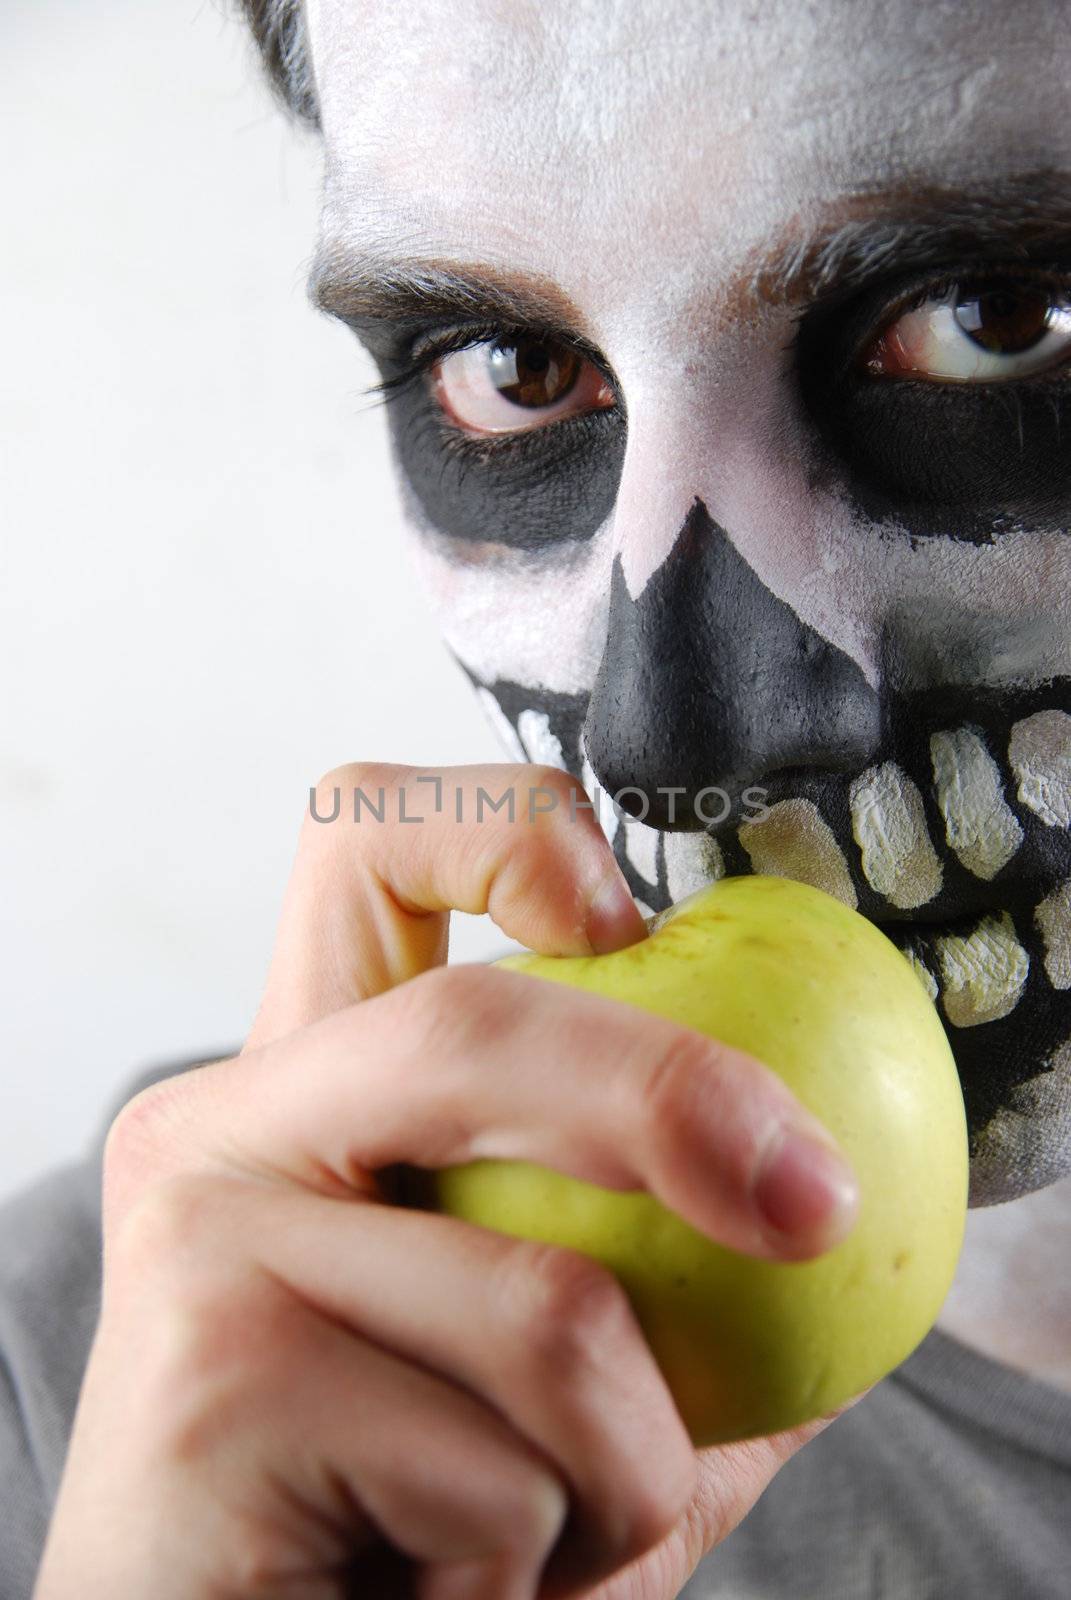 Don't eat just apples (skeleton guy concept) by luissantos84